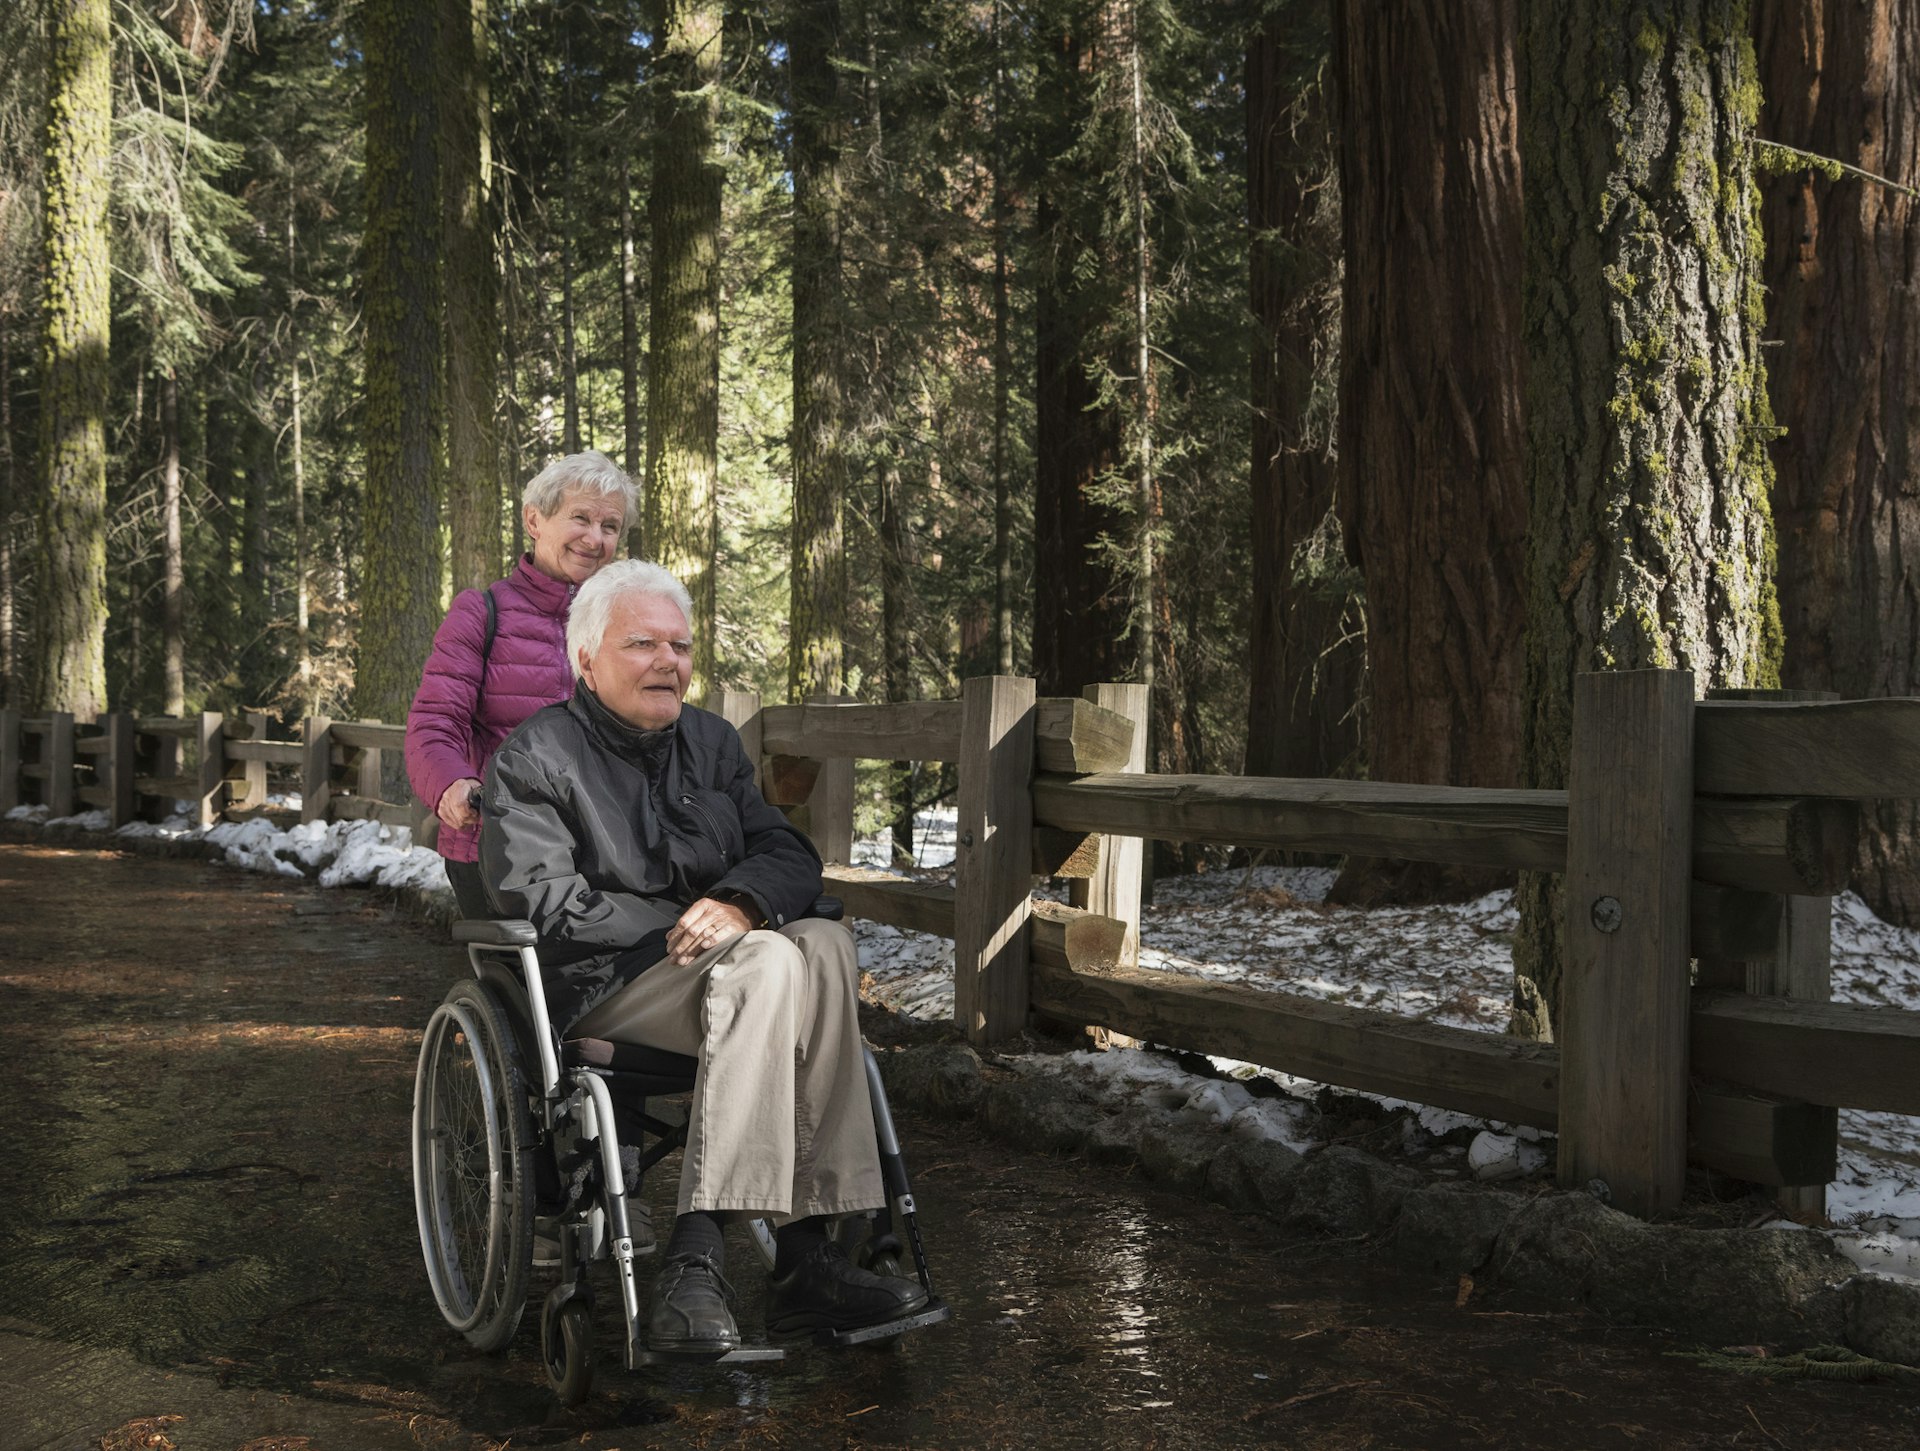 A senior man is being pushed in a wheelchair by a companion in Sequoia National Park